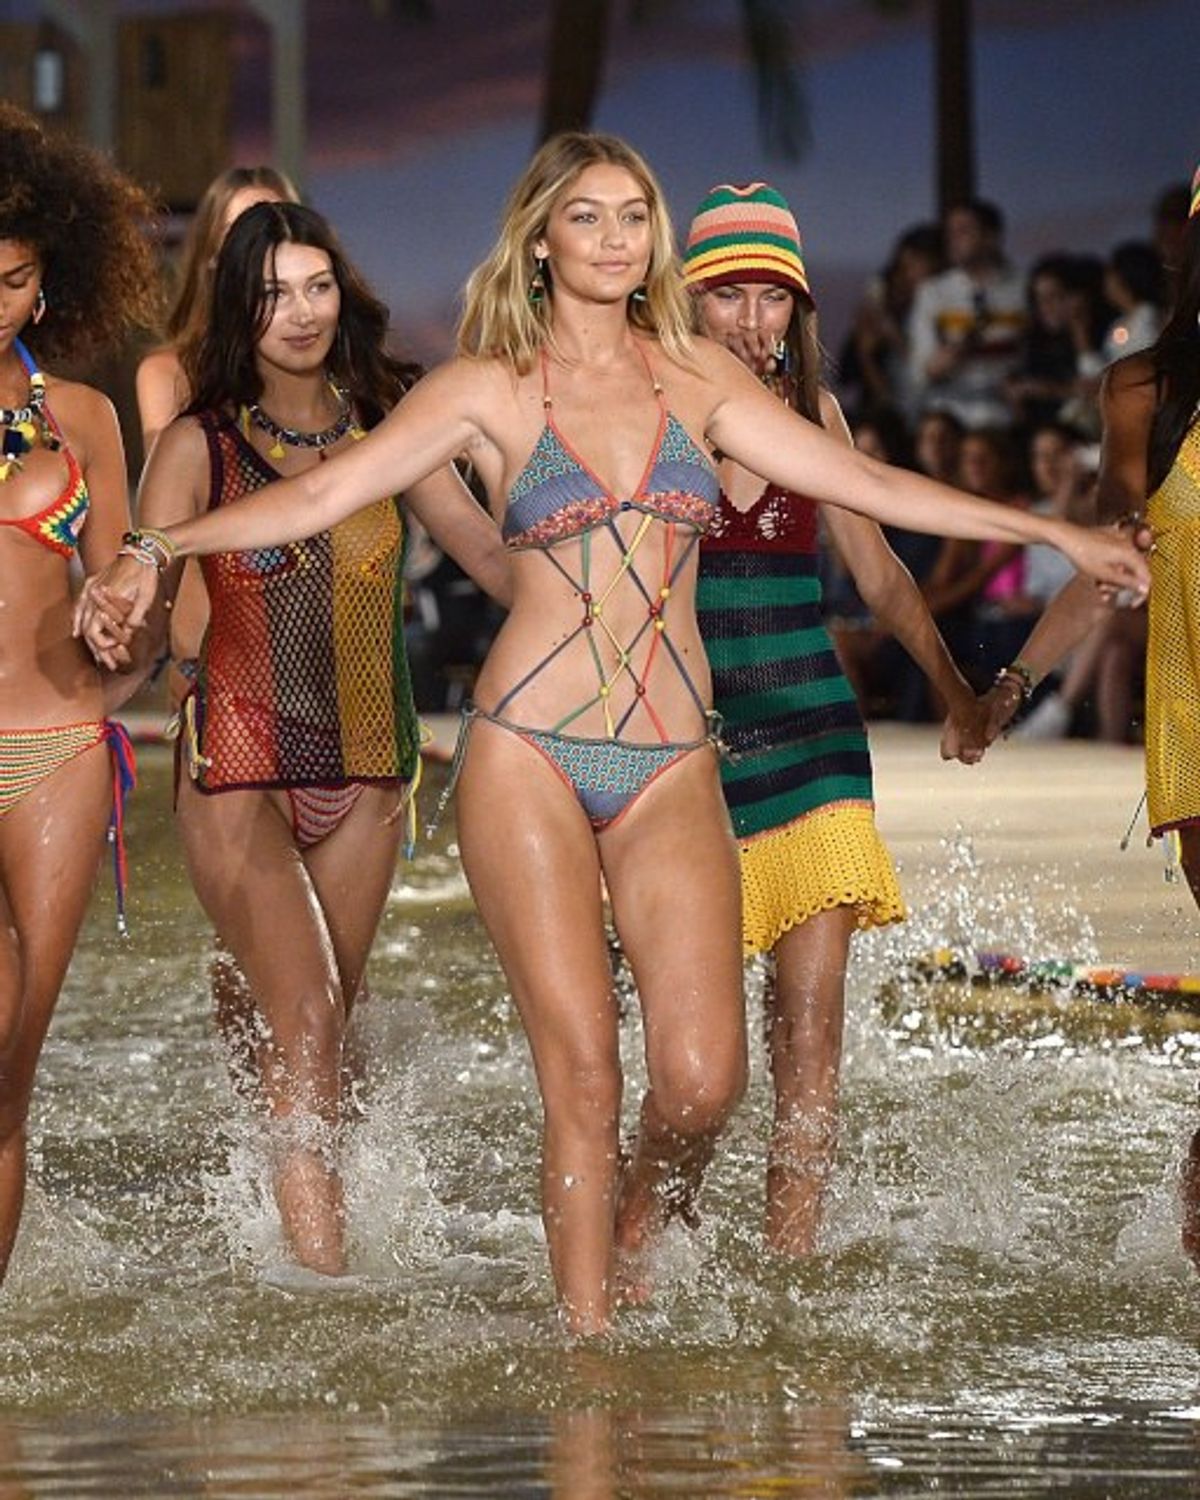 Gigi Hadid: A Healthy Dose Of Reality In The Fashion Industry